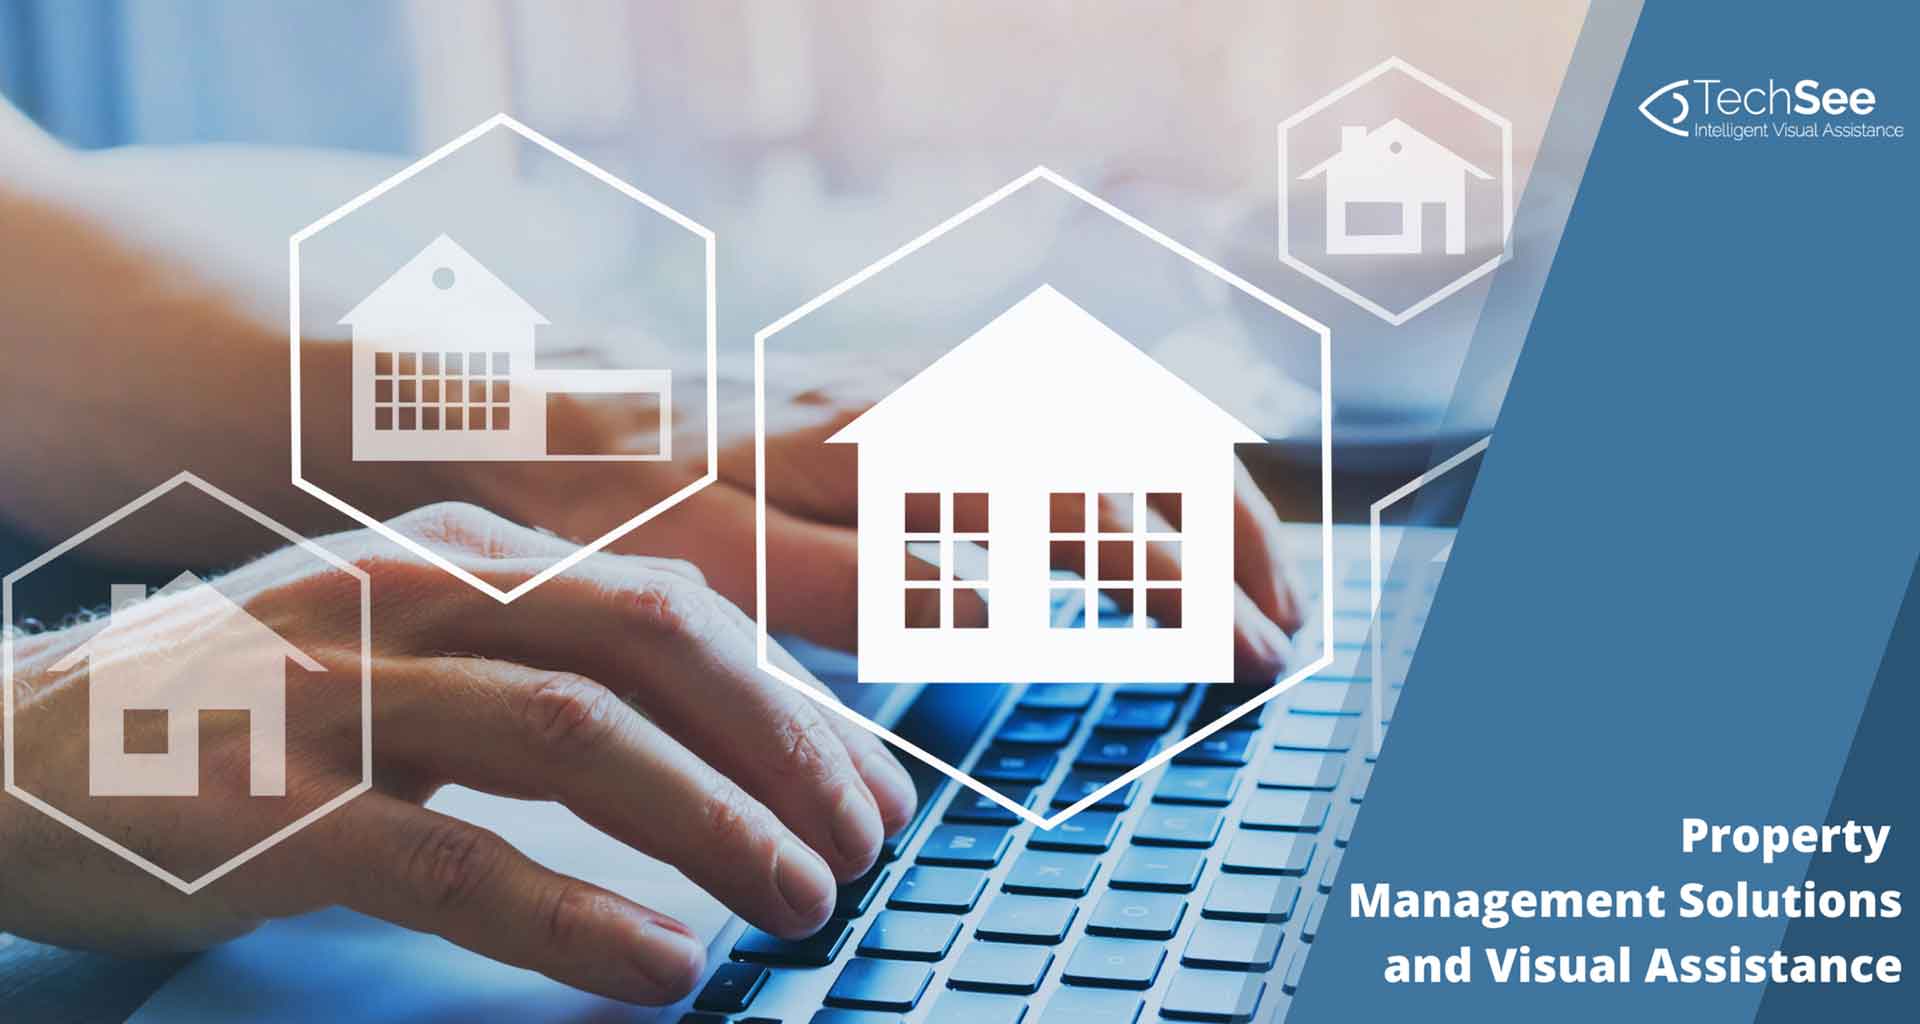 New Tech Trends Create Better Property Management Solutions for Homeowners and Tenants